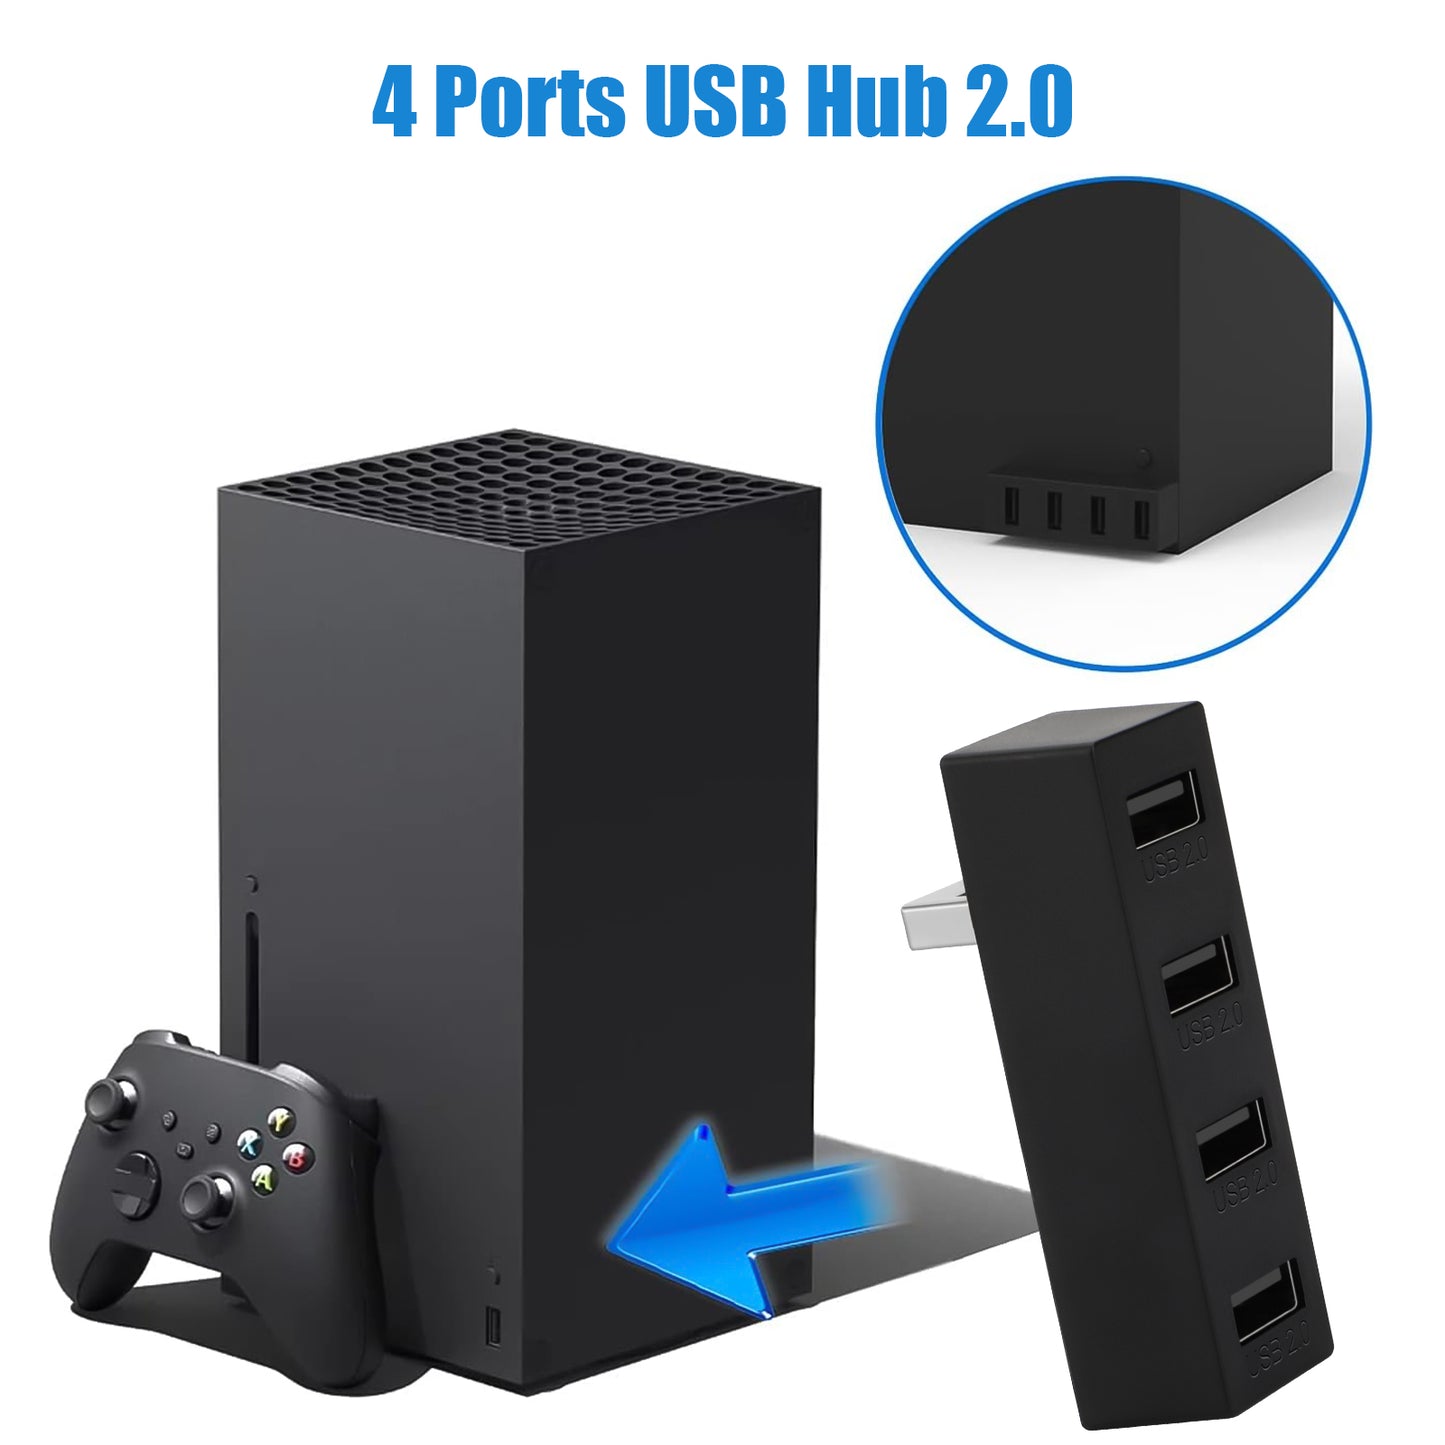 4 Ports USB Hub 2.0 for Xbox Series X/S - Lightweight & Compact Design - Seamless Connectivity for Controllers, Keyboards, and More,Stable Data Transmission, Plug and Play Convenience（black）